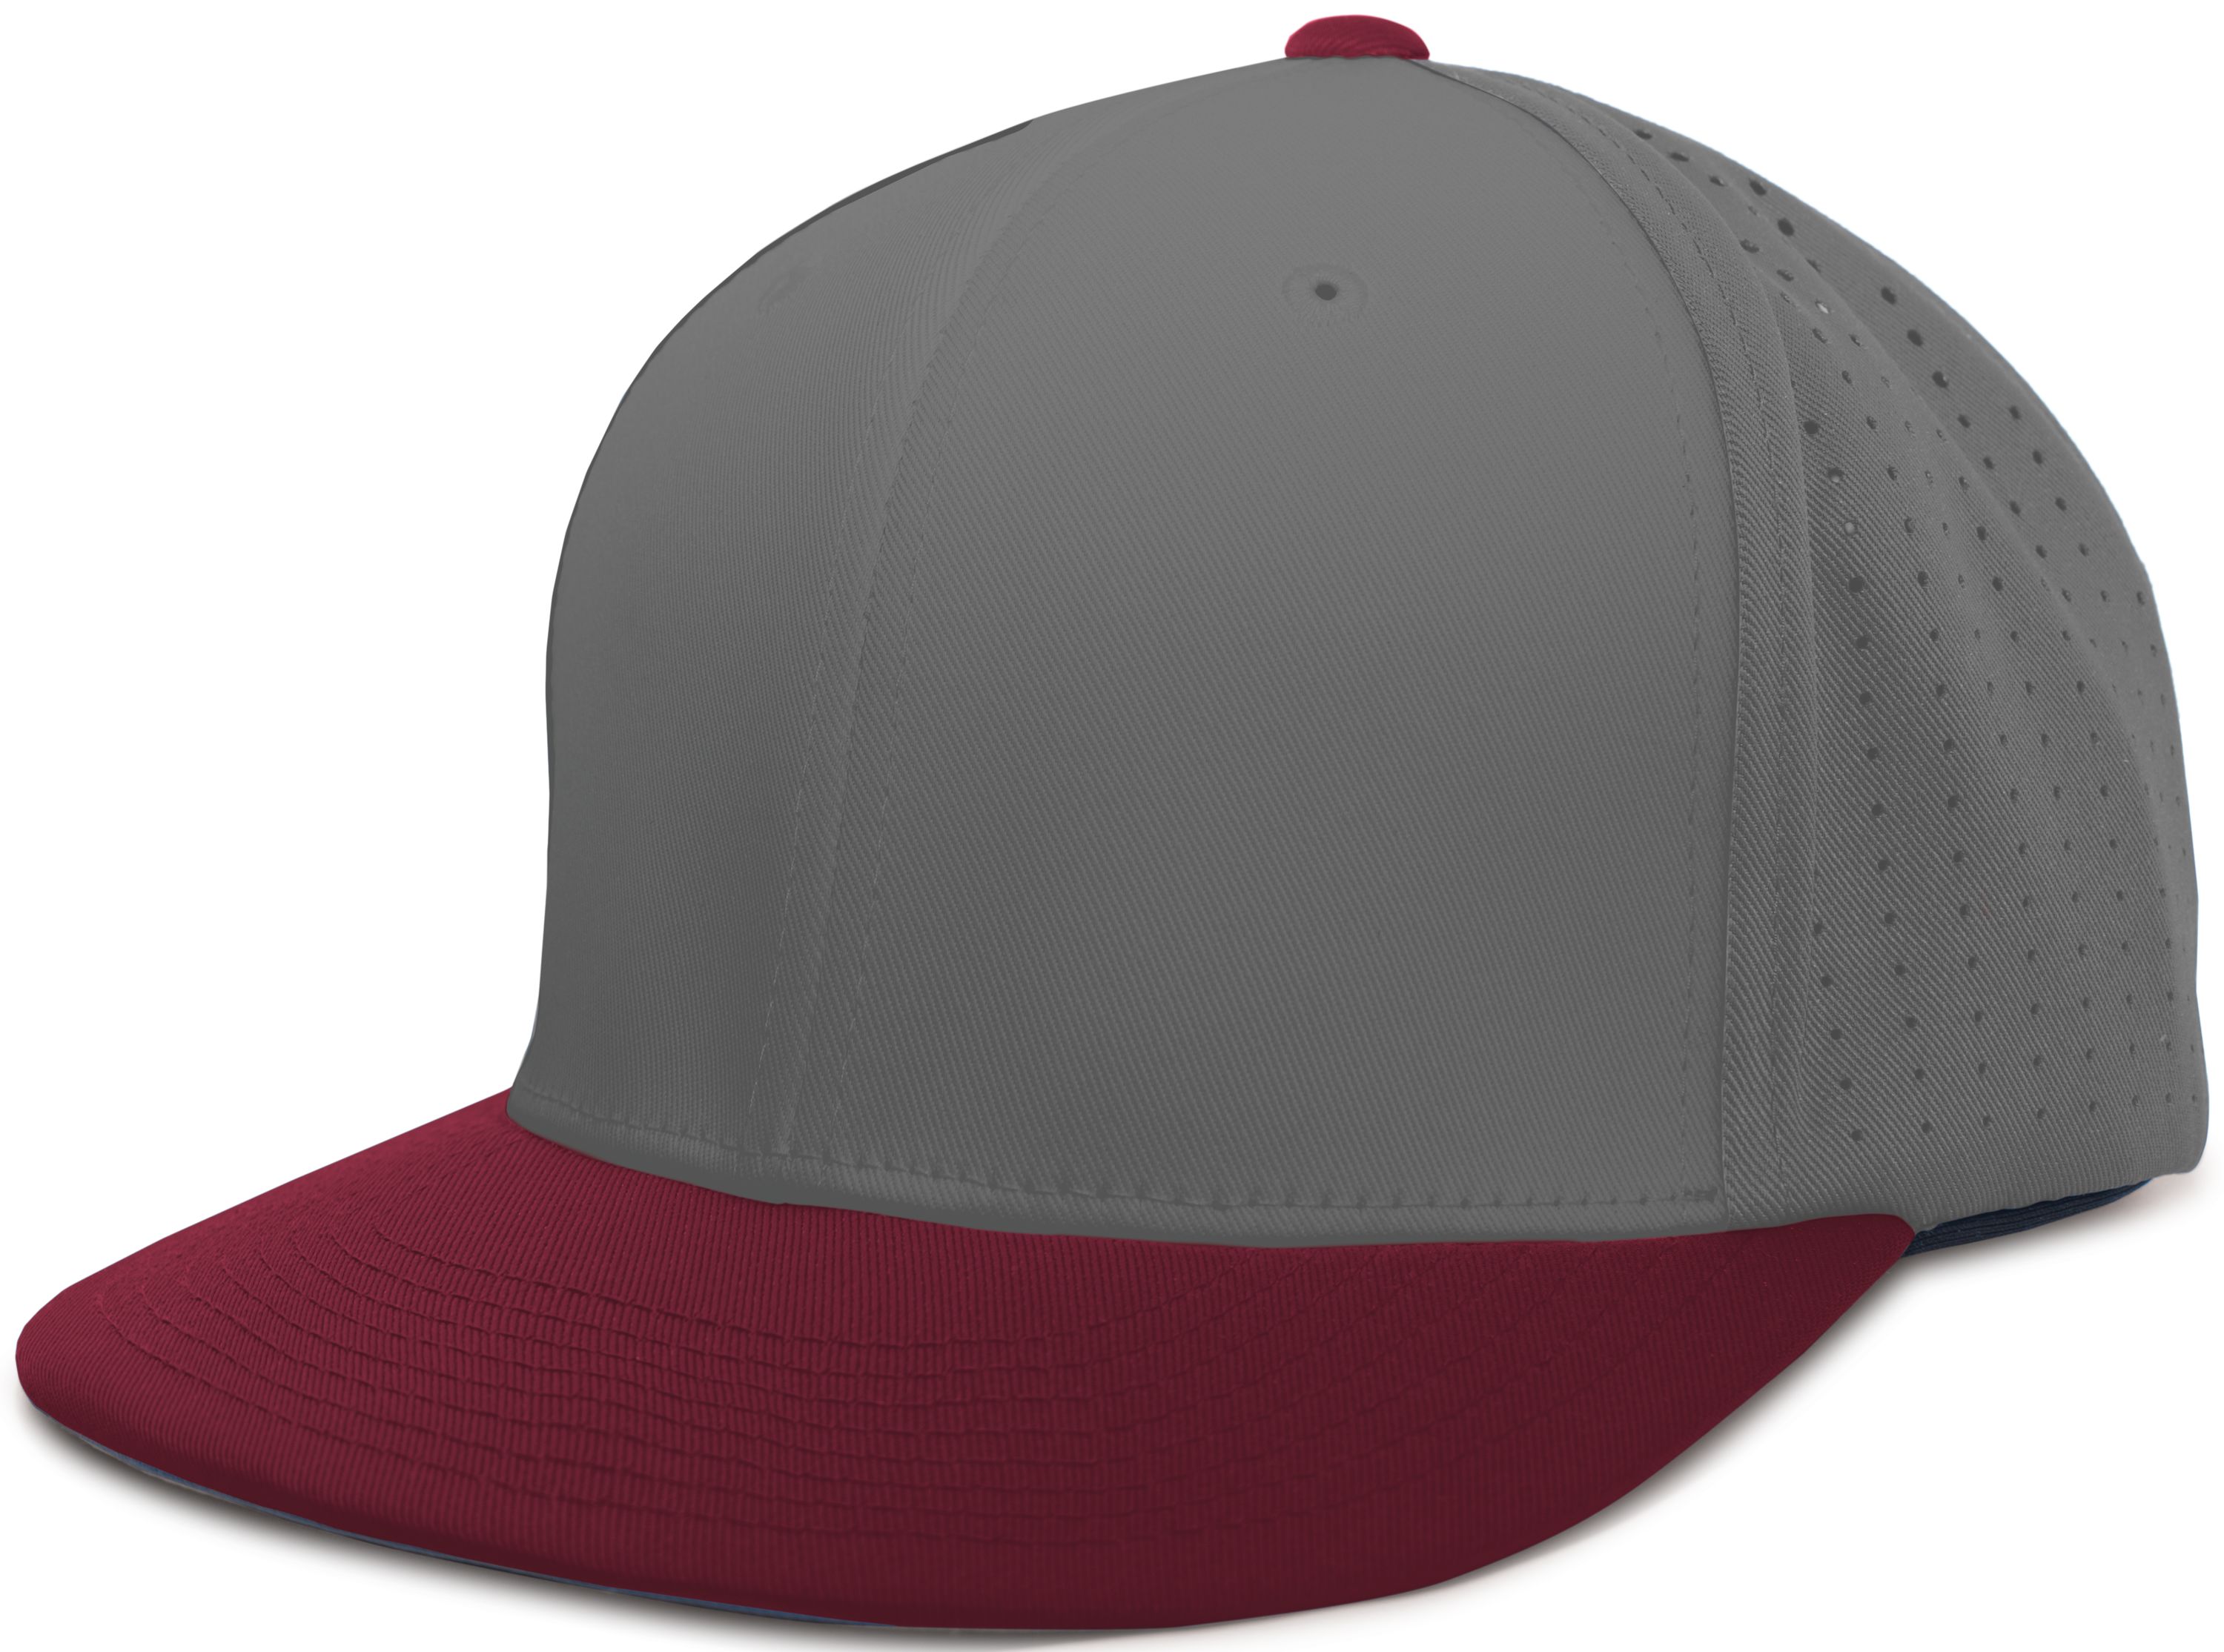 click to view Graphite/Maroon